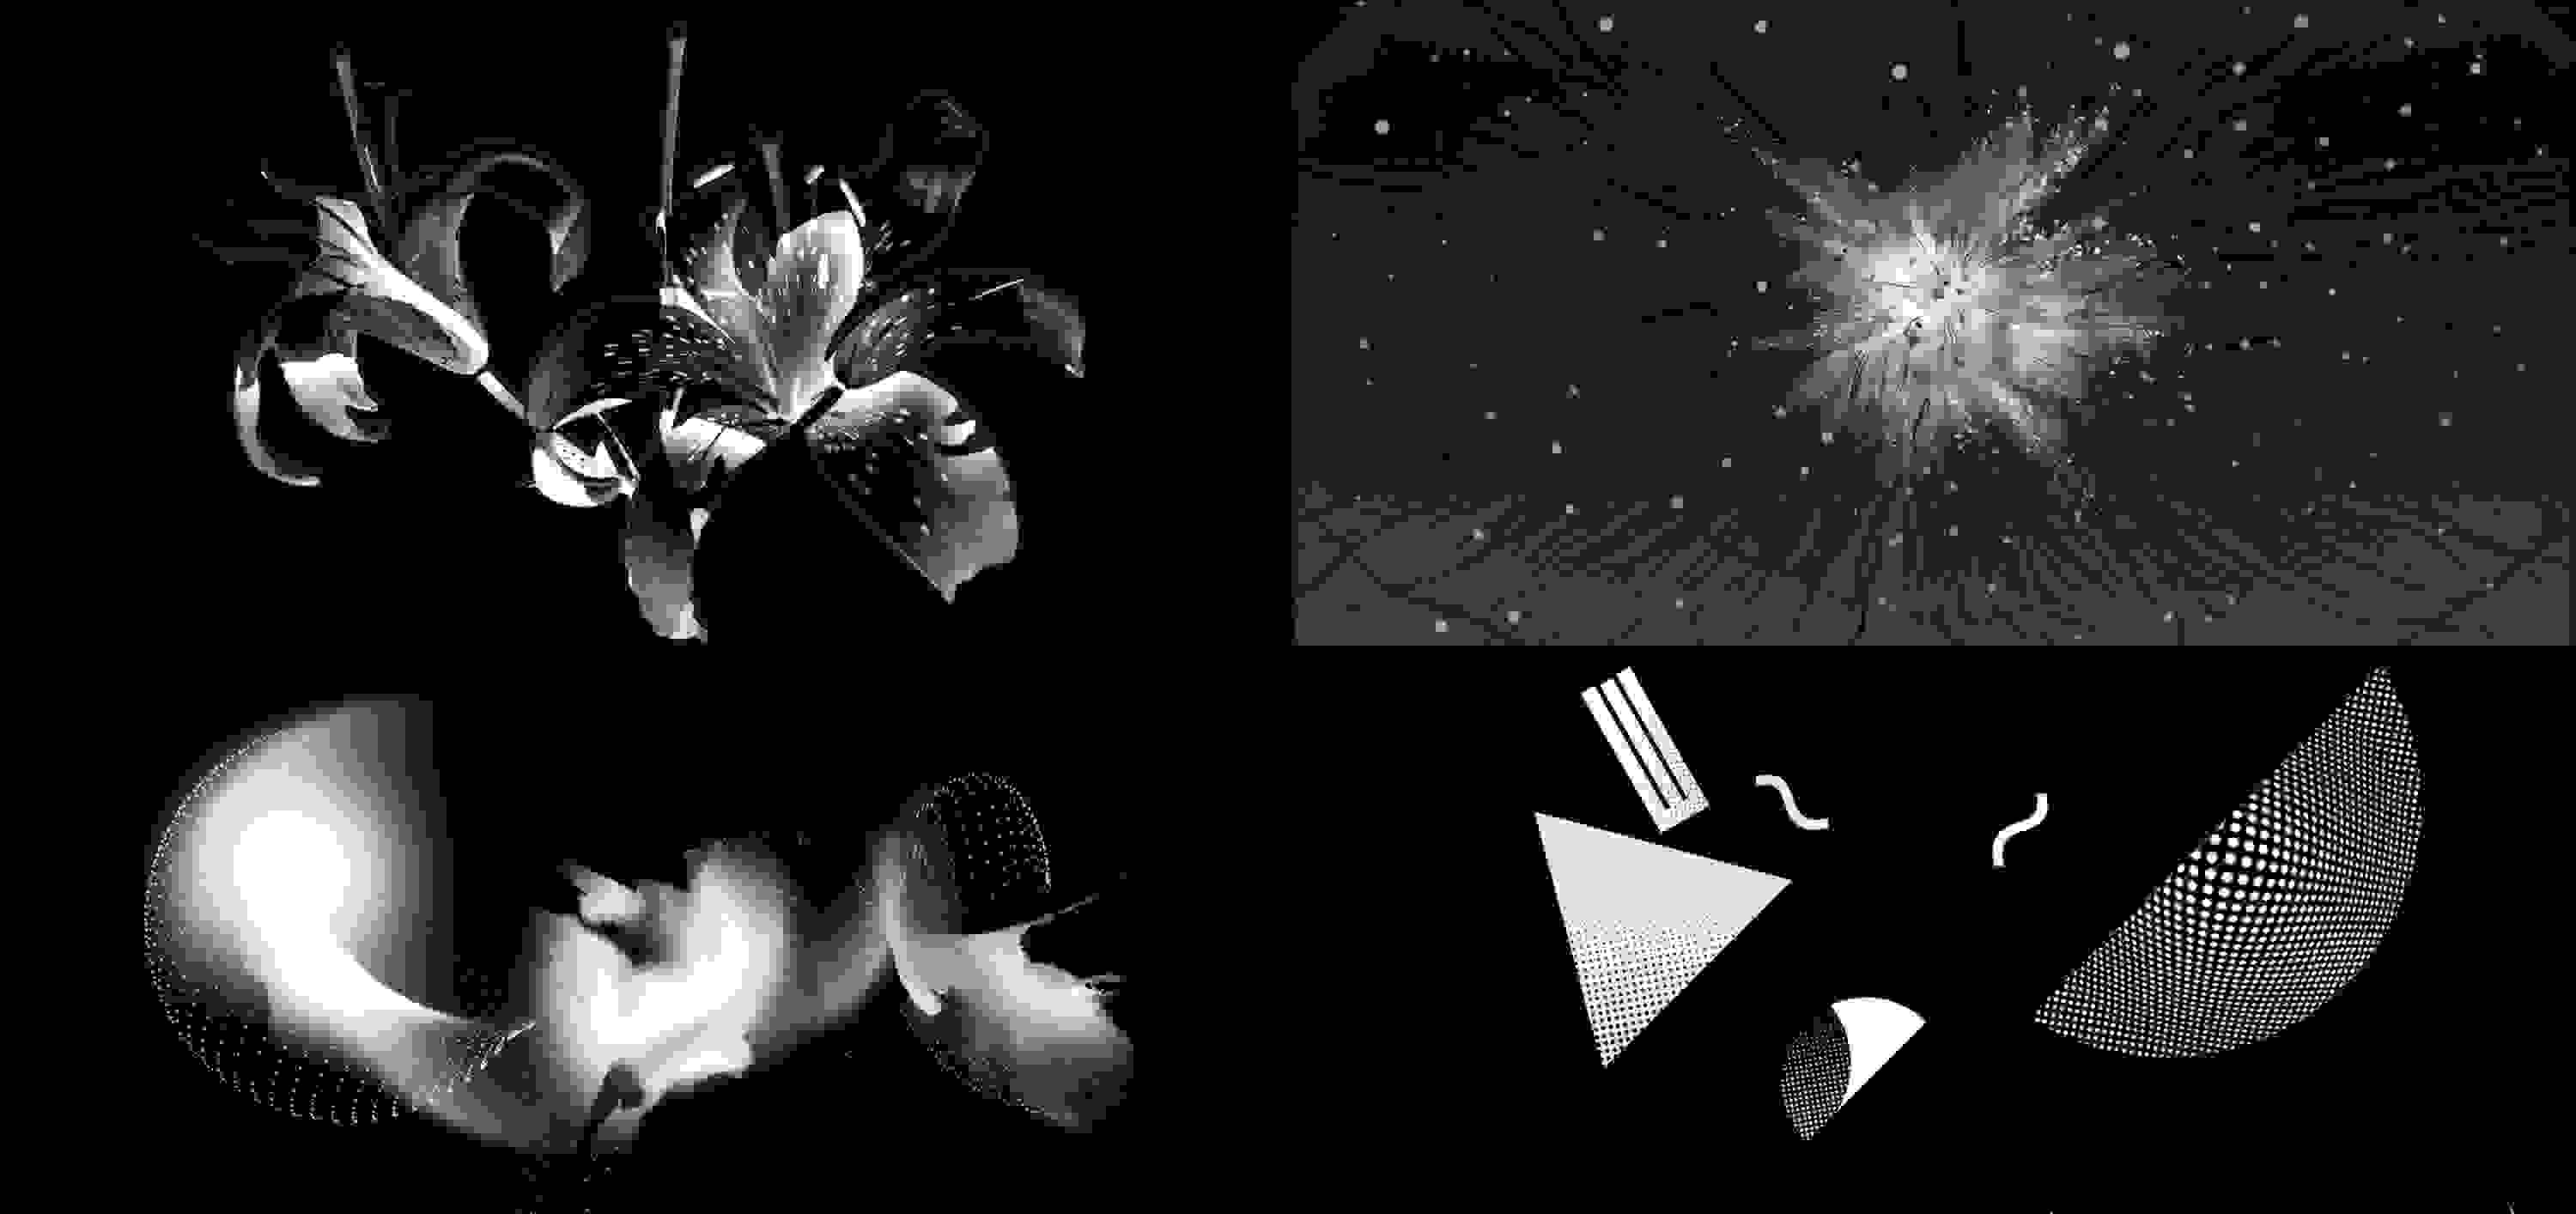 Here are black and white designs of geometric forms that appear to hover in space.